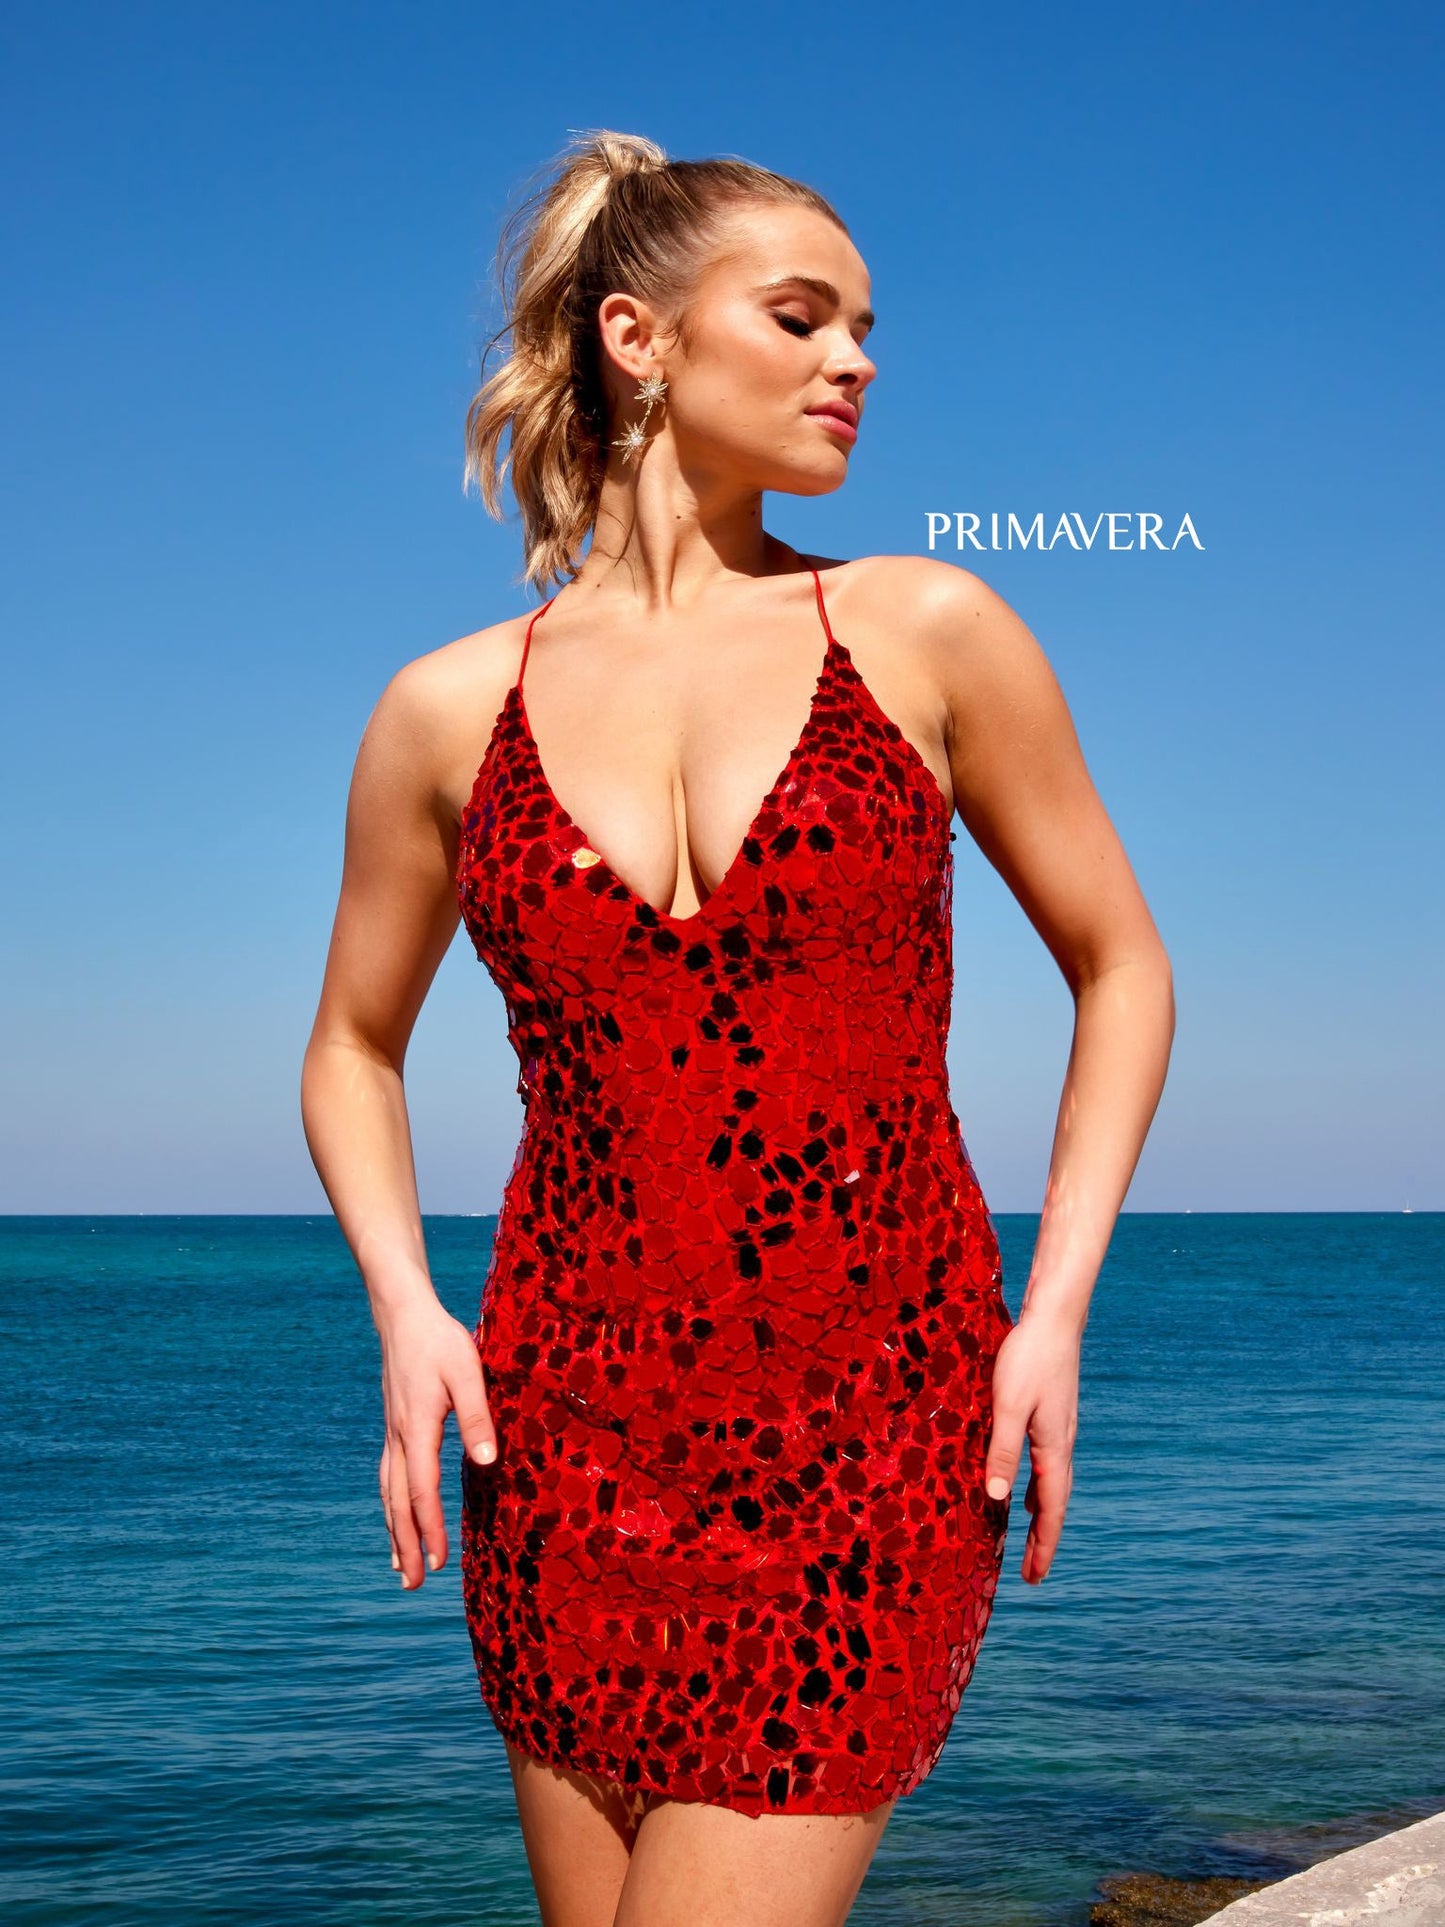 This Primavera Couture 4056 Cut Glass Open Tie Back V-Neck Cocktail Homecoming Dress is crafted with 100% premium fabric for maximum comfort and style. This outstanding design features an open tie back detail, V-neckline and shimmering cut glass embroidered fabric, perfect for making heads turn at a special occasion.   